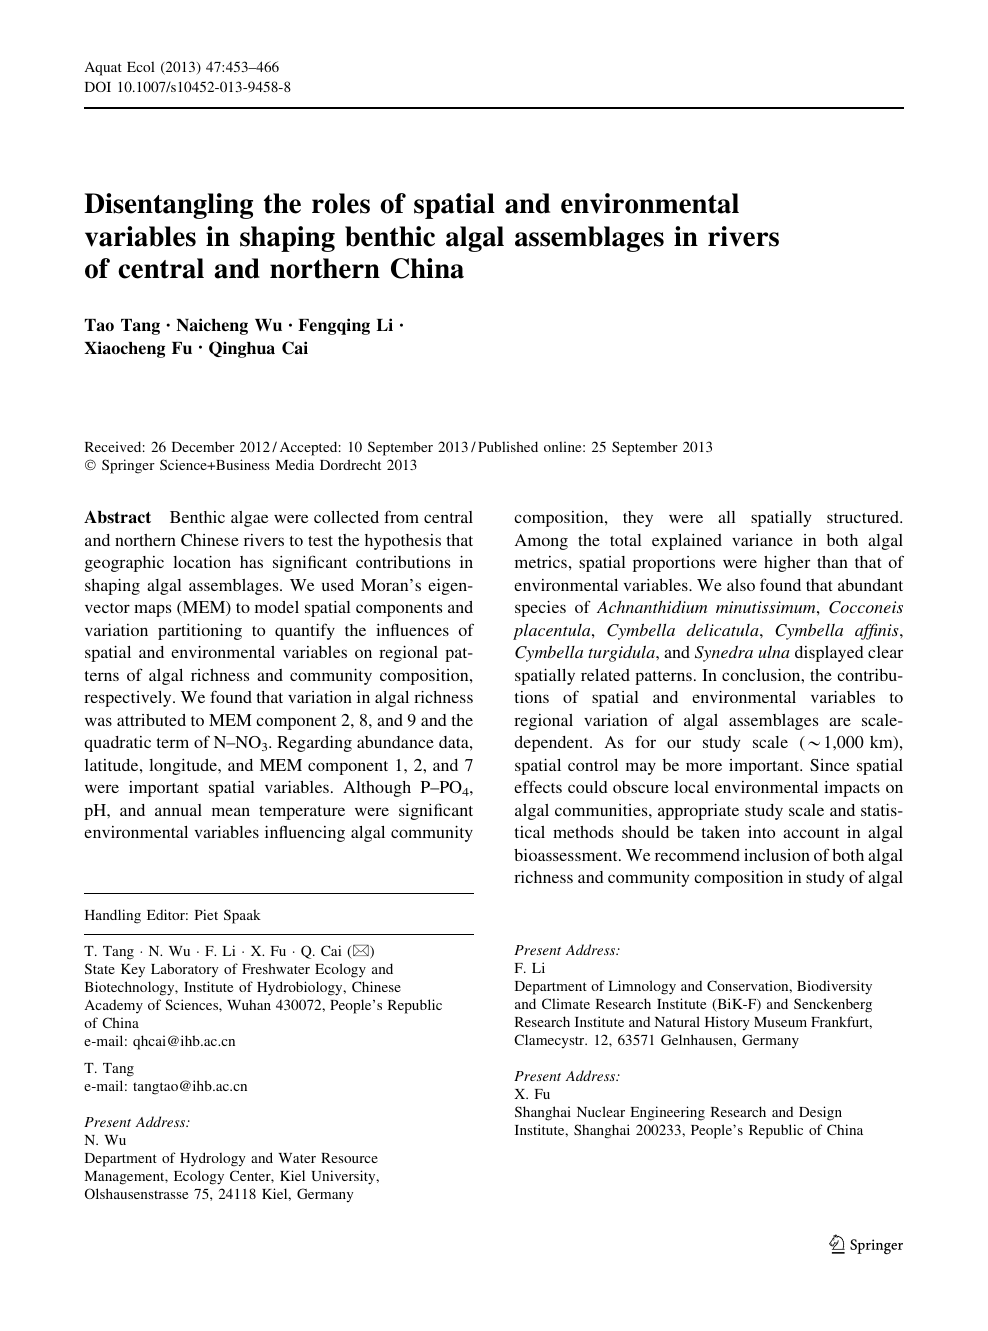 Disentangling The Roles Of Spatial And Environmental Variables In Shaping Benthic Algal Assemblages In Rivers Of Central And Northern China Topic Of Research Paper In Biological Sciences Download Scholarly Article Pdf